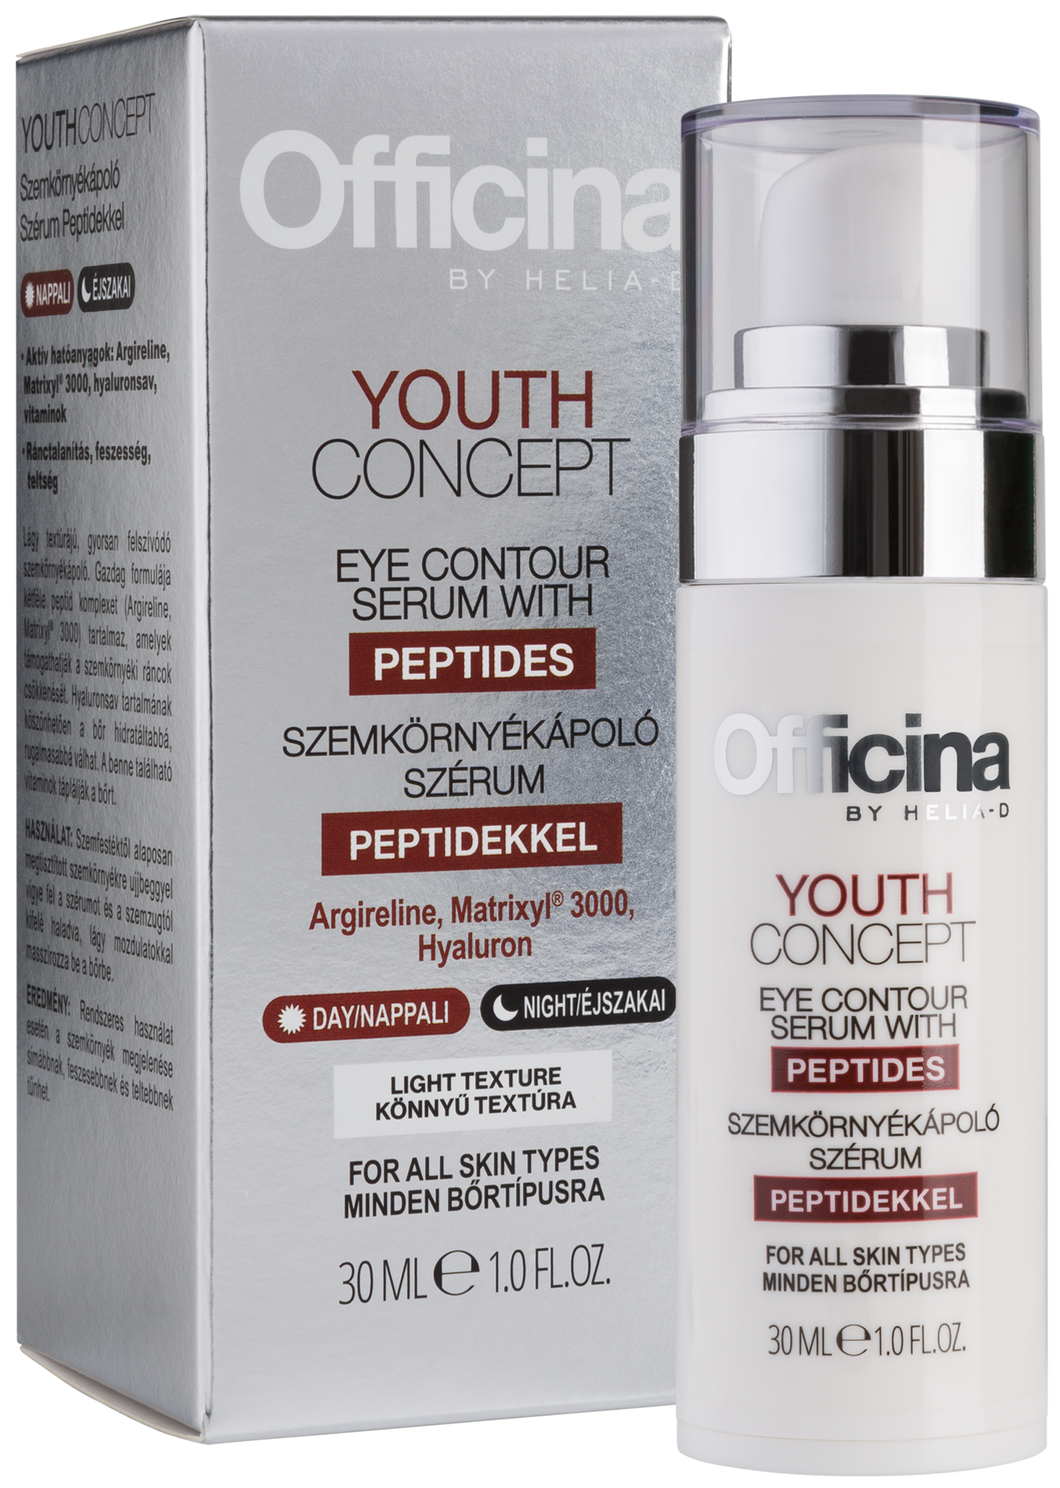 Officina by Helia-D Youth Concept Eye Contour Serum With Peptides